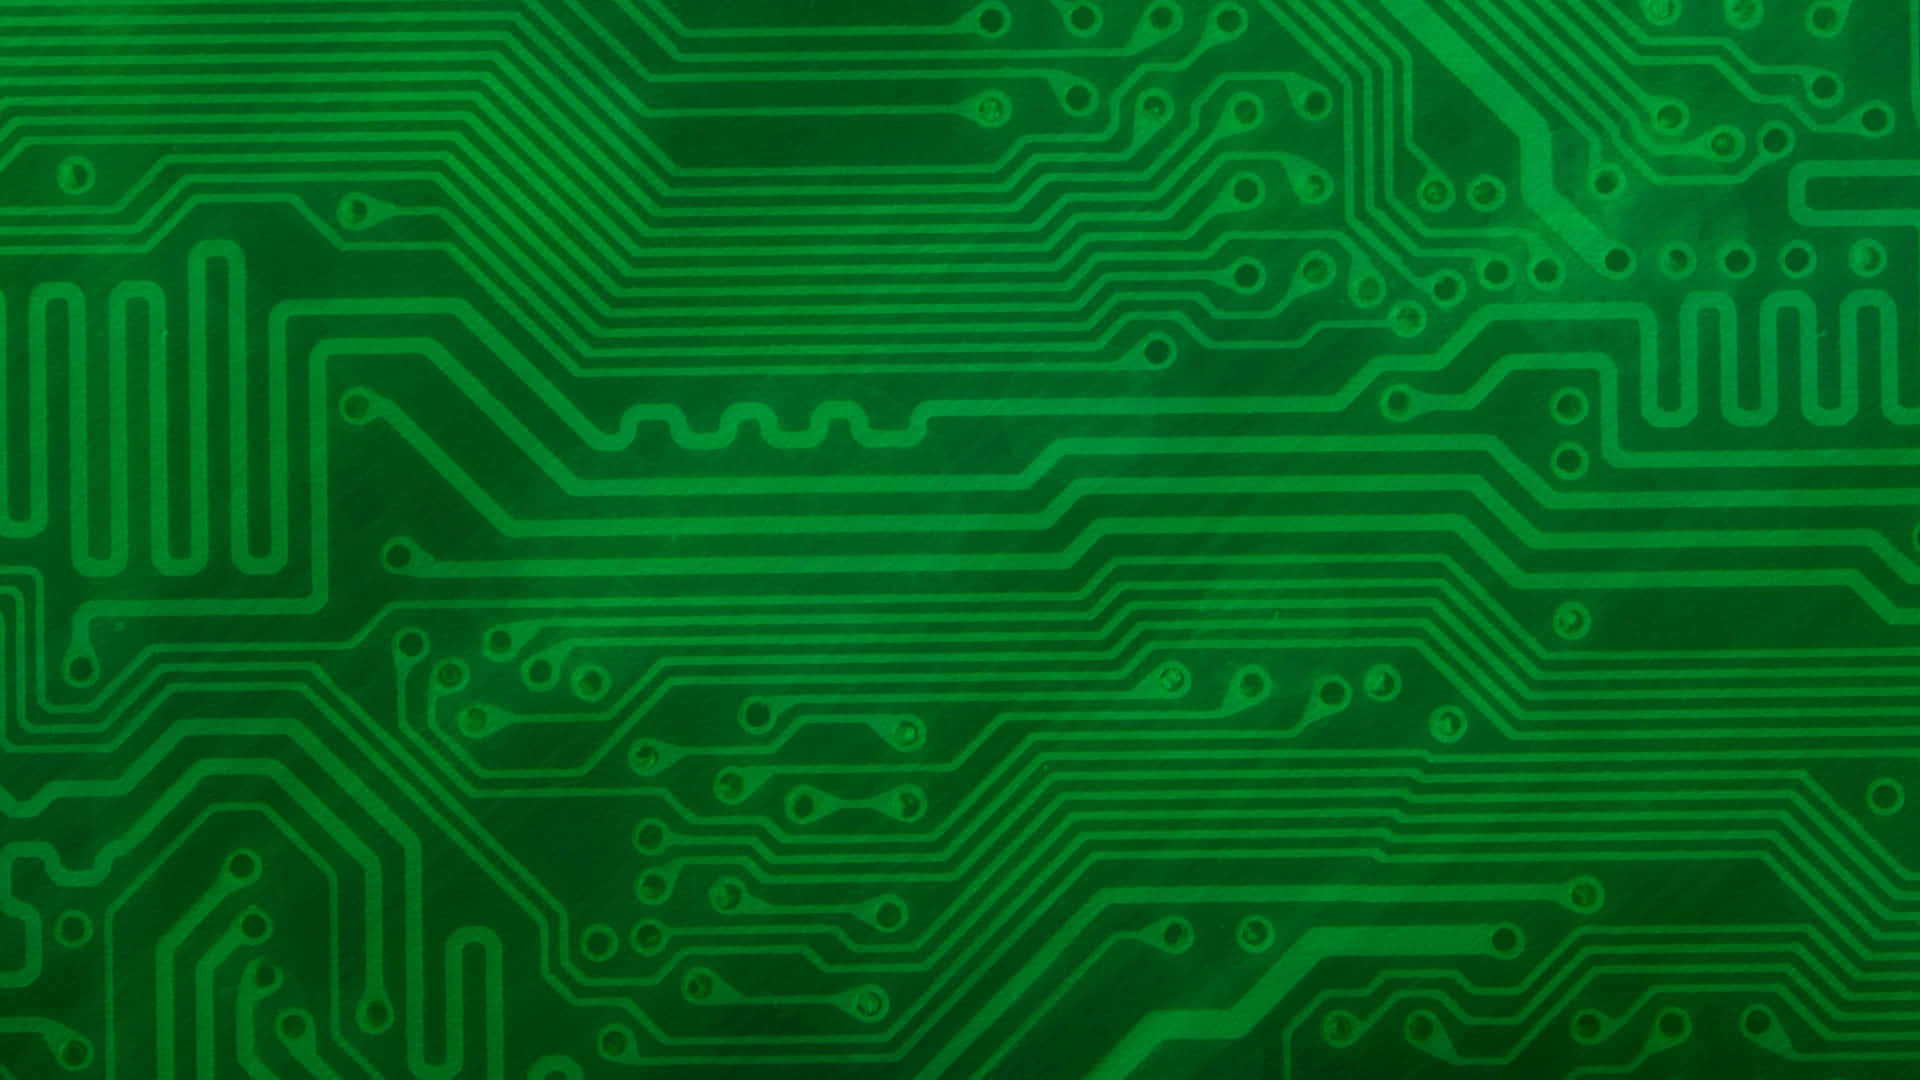 A Green Circuit Board Background Photo